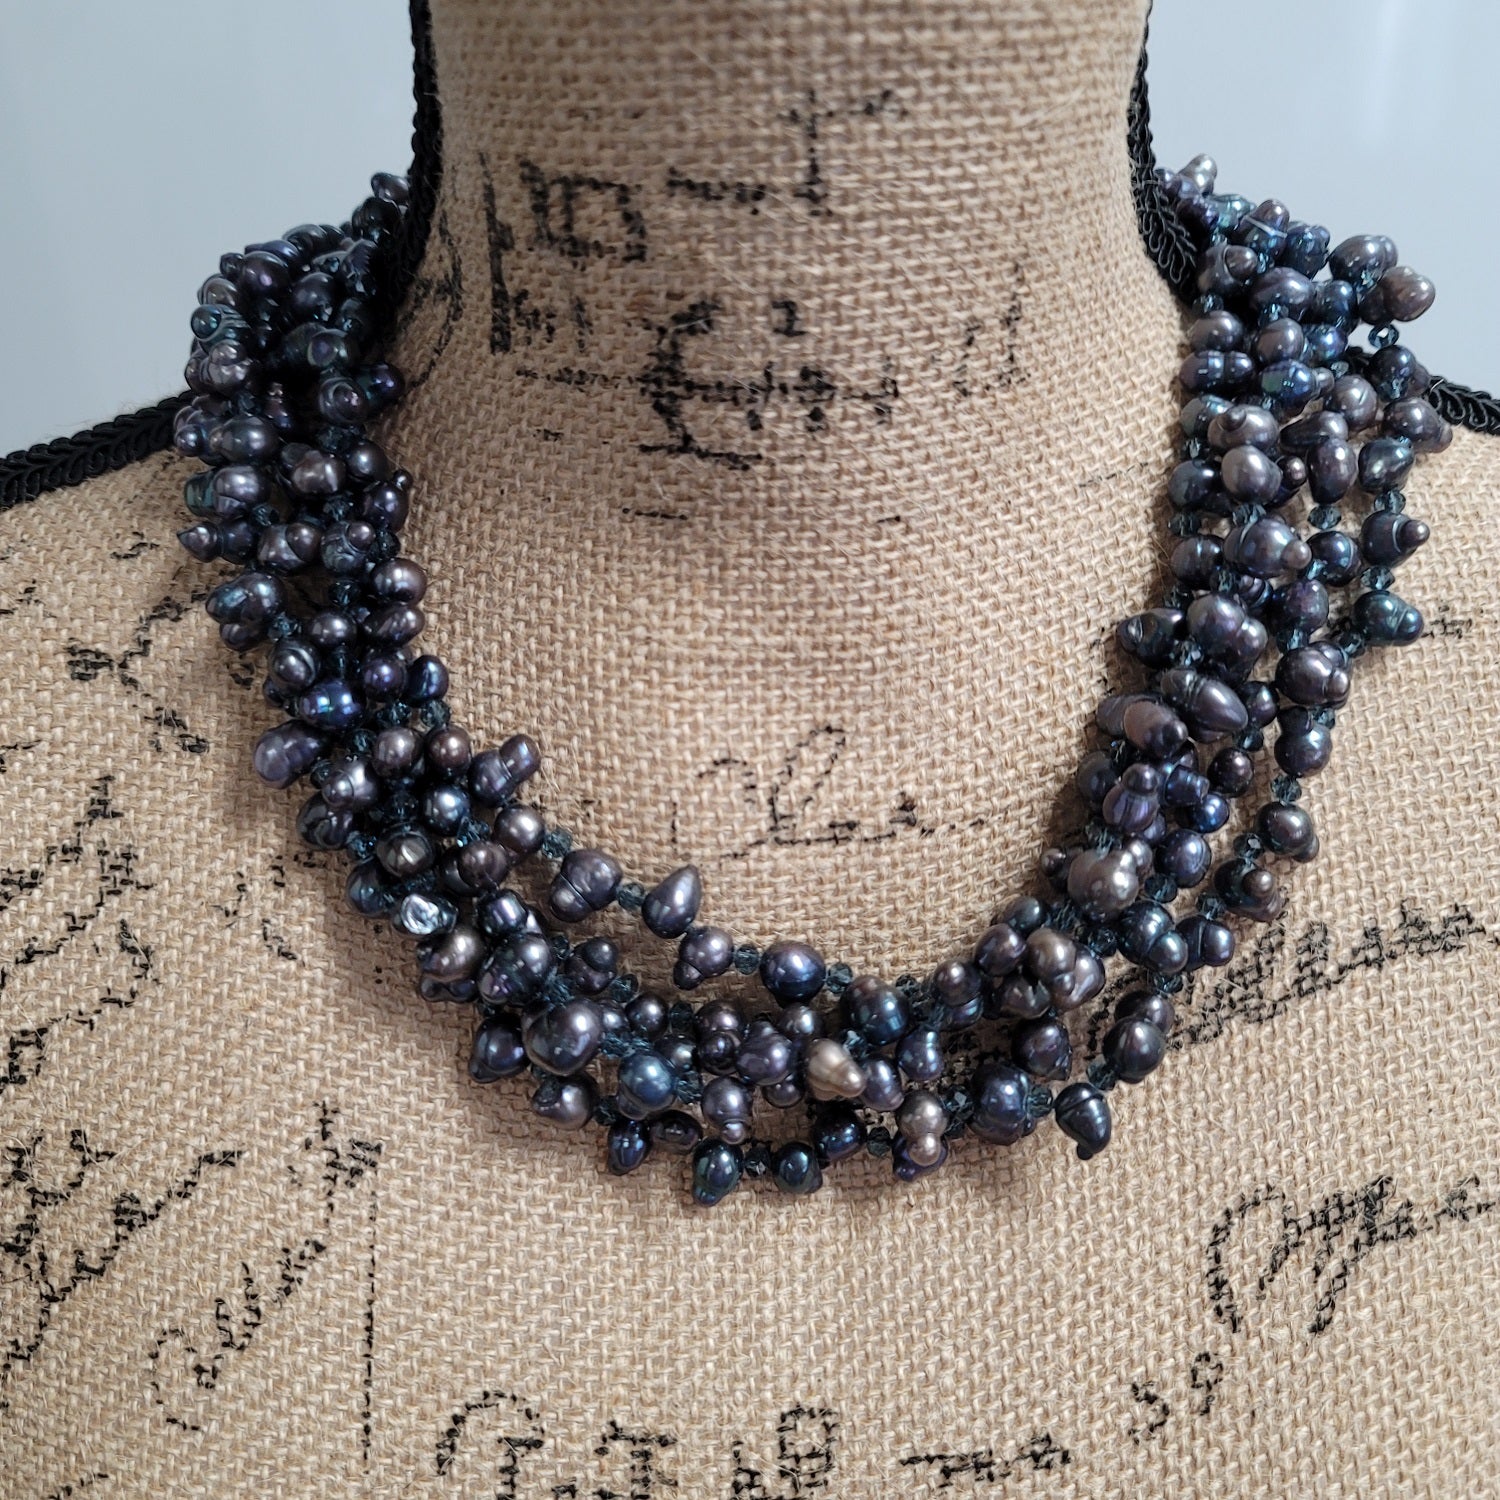 Layers of Luminous Black Freshwater Pearl Multi-Strand Necklace | Peters Vault